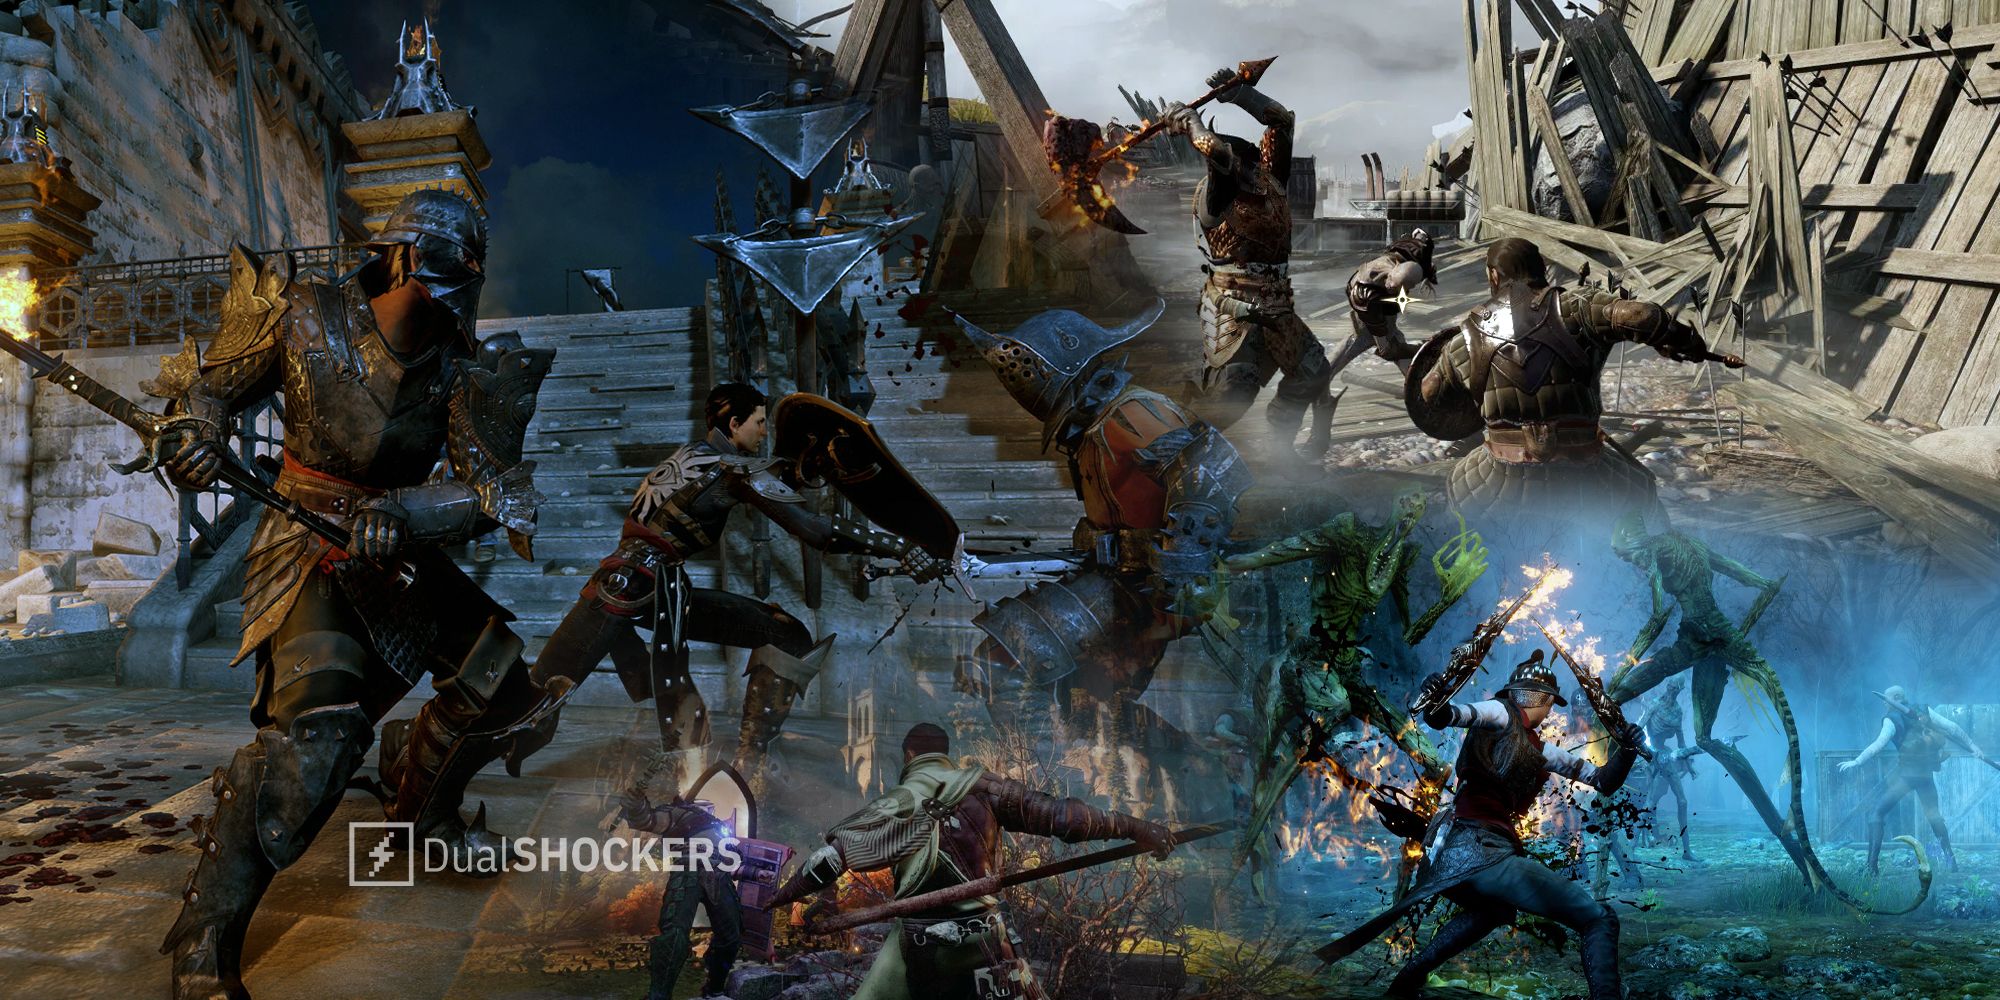 Dragon Age: Inquisition gameplay and combat